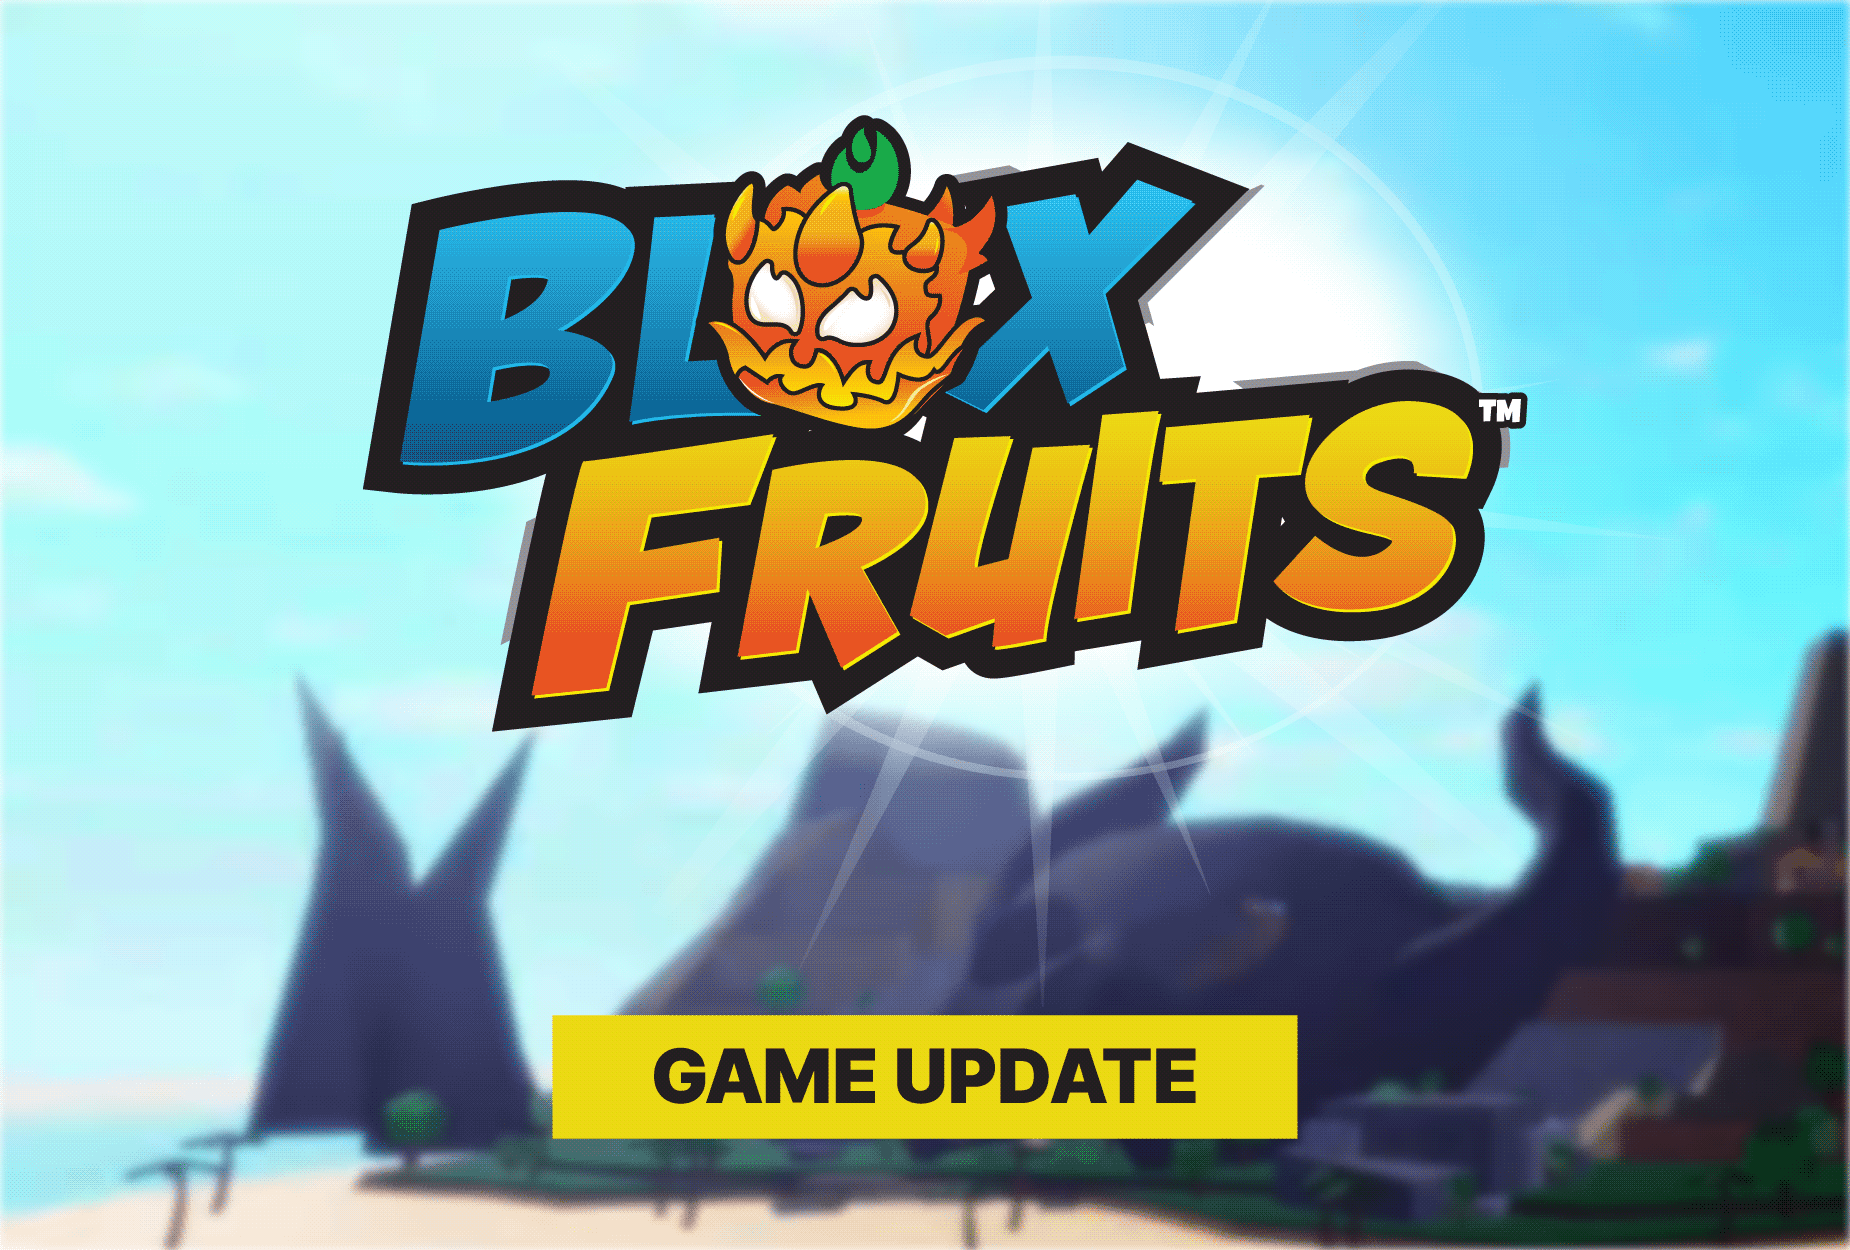 NEW* ALL WORKING CODES FOR BLOX FRUITS IN NOVEMBER 2023! ROBLOX BLOX FRUITS  CODES 